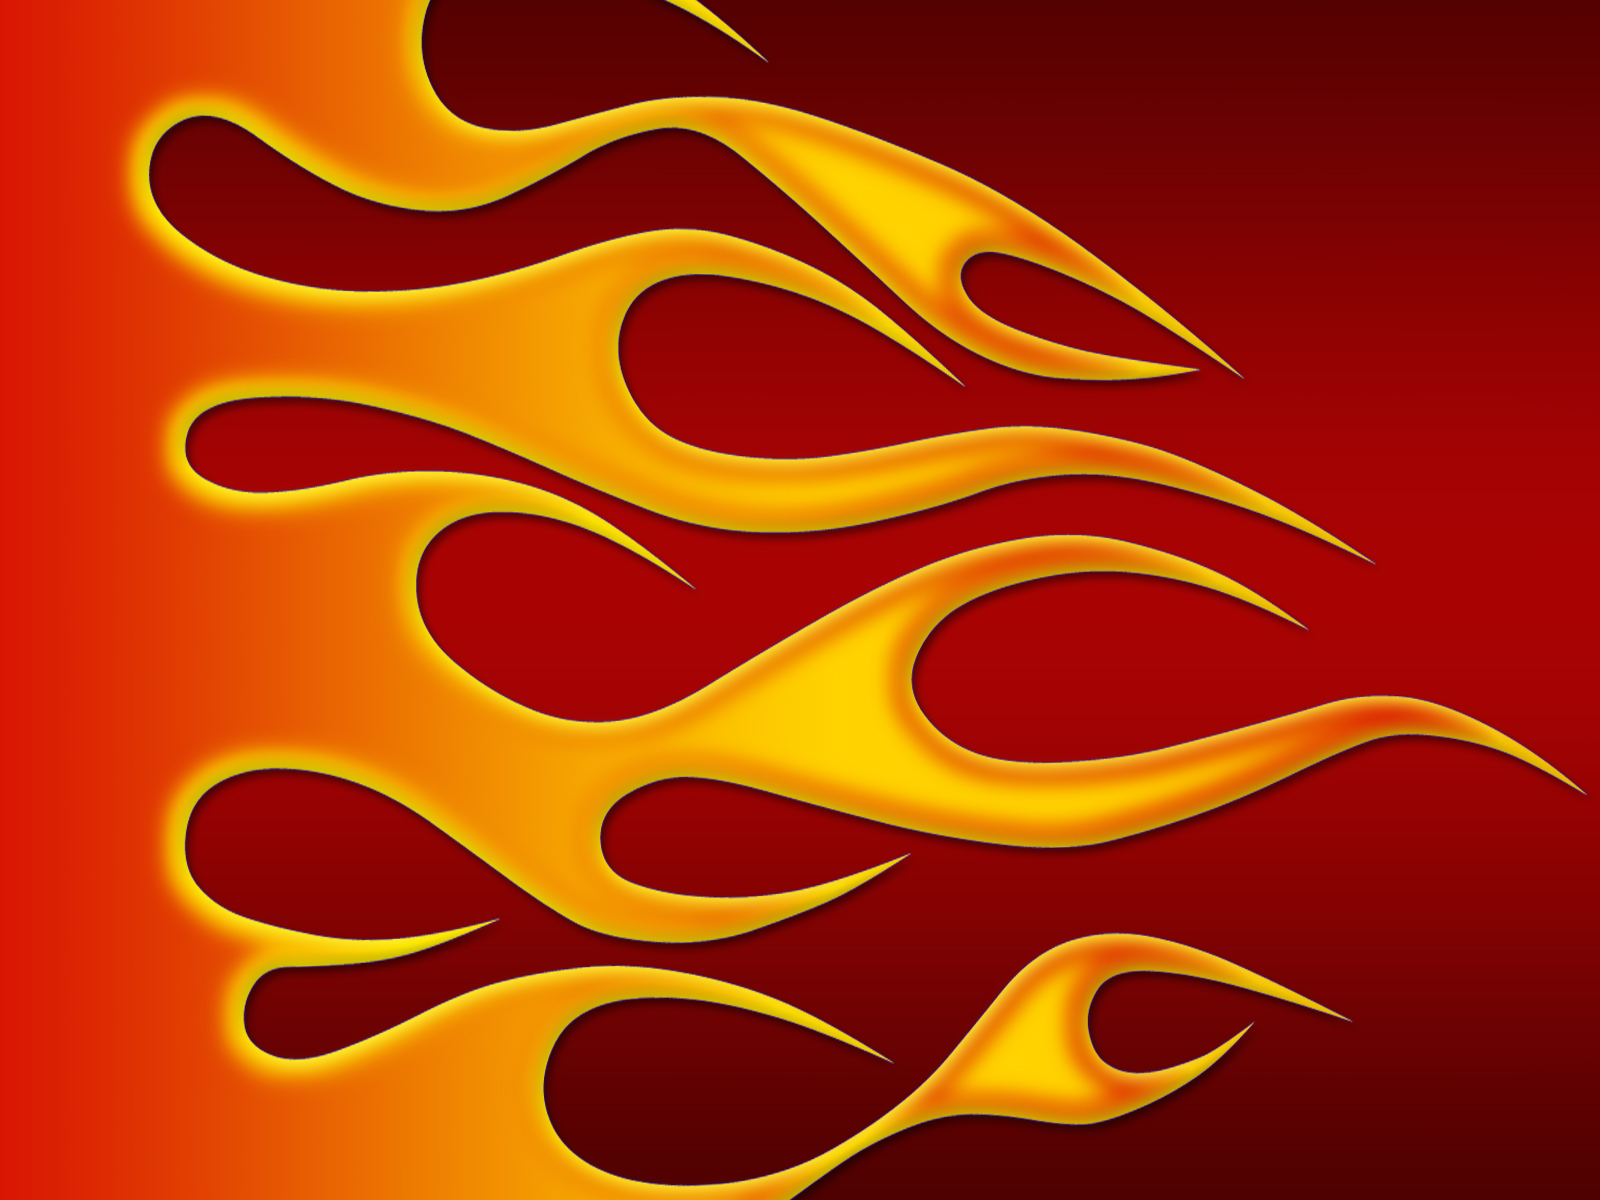 Hot Rod Flames - 8 by jbensch on Clipart library.